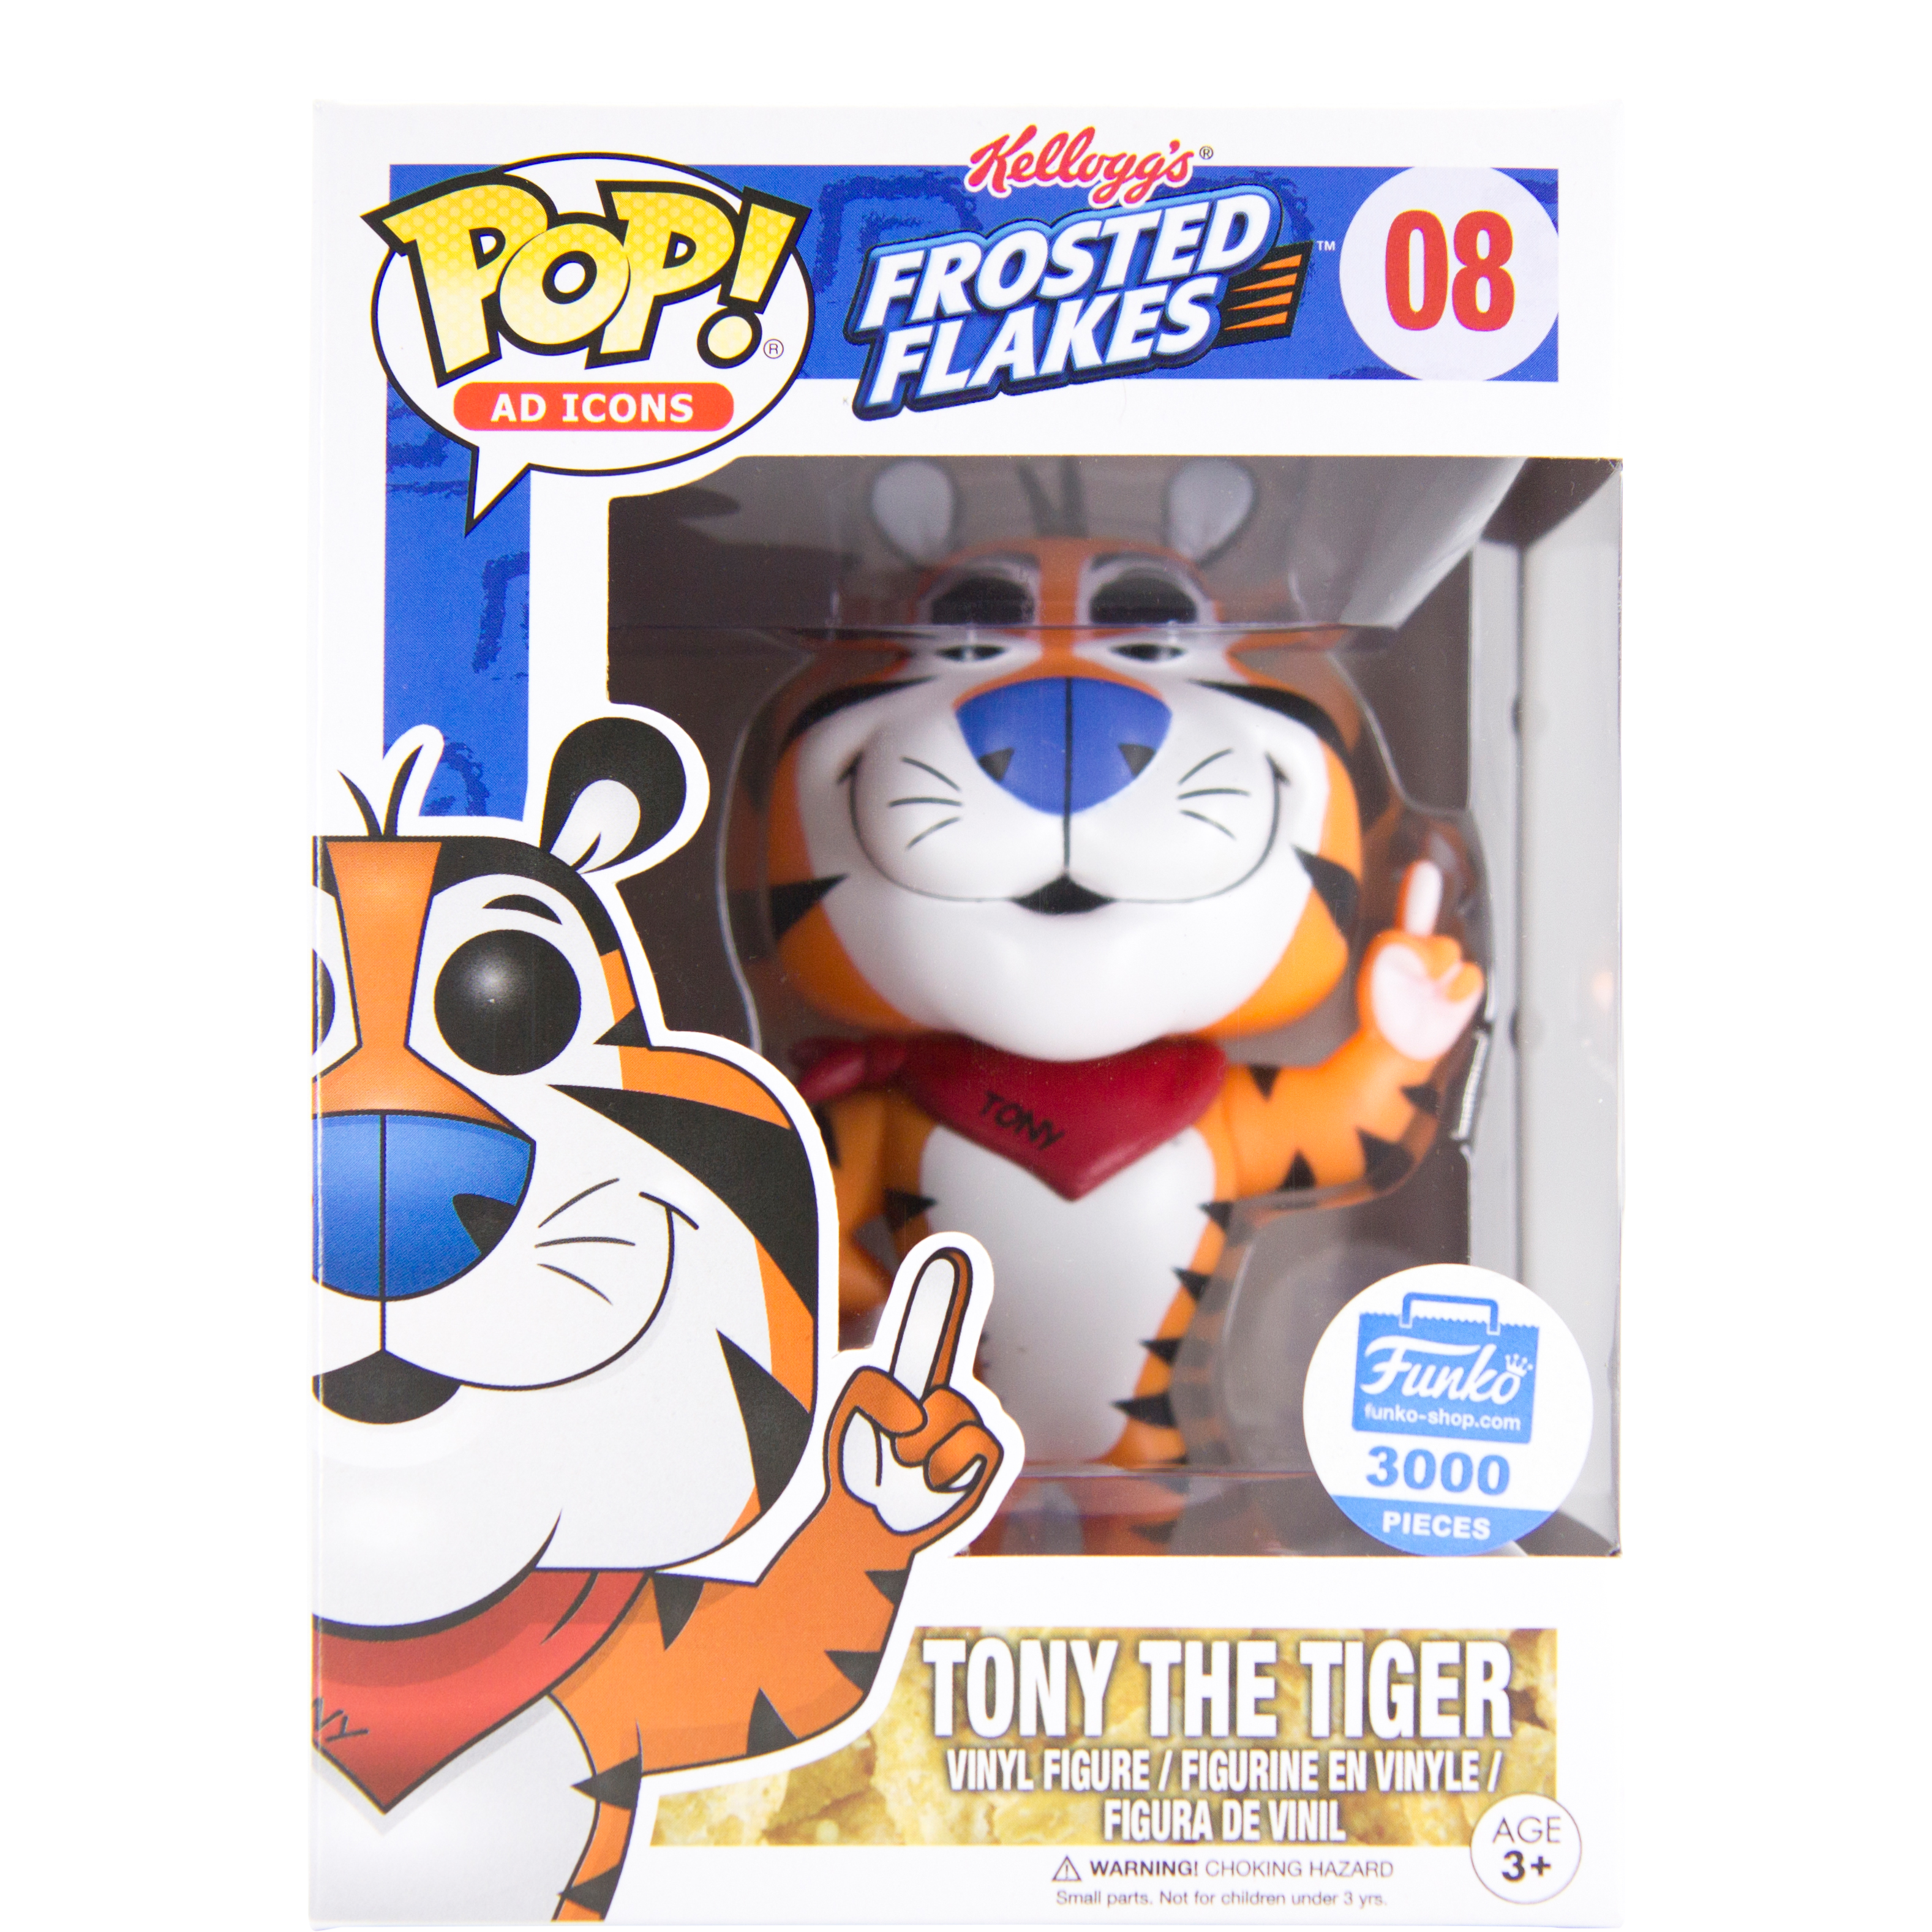 Details about   Funko Pop Frosted Flakes Tony The Tiger #08 Funko Shop 3000 Pcs MINT。+Protector 